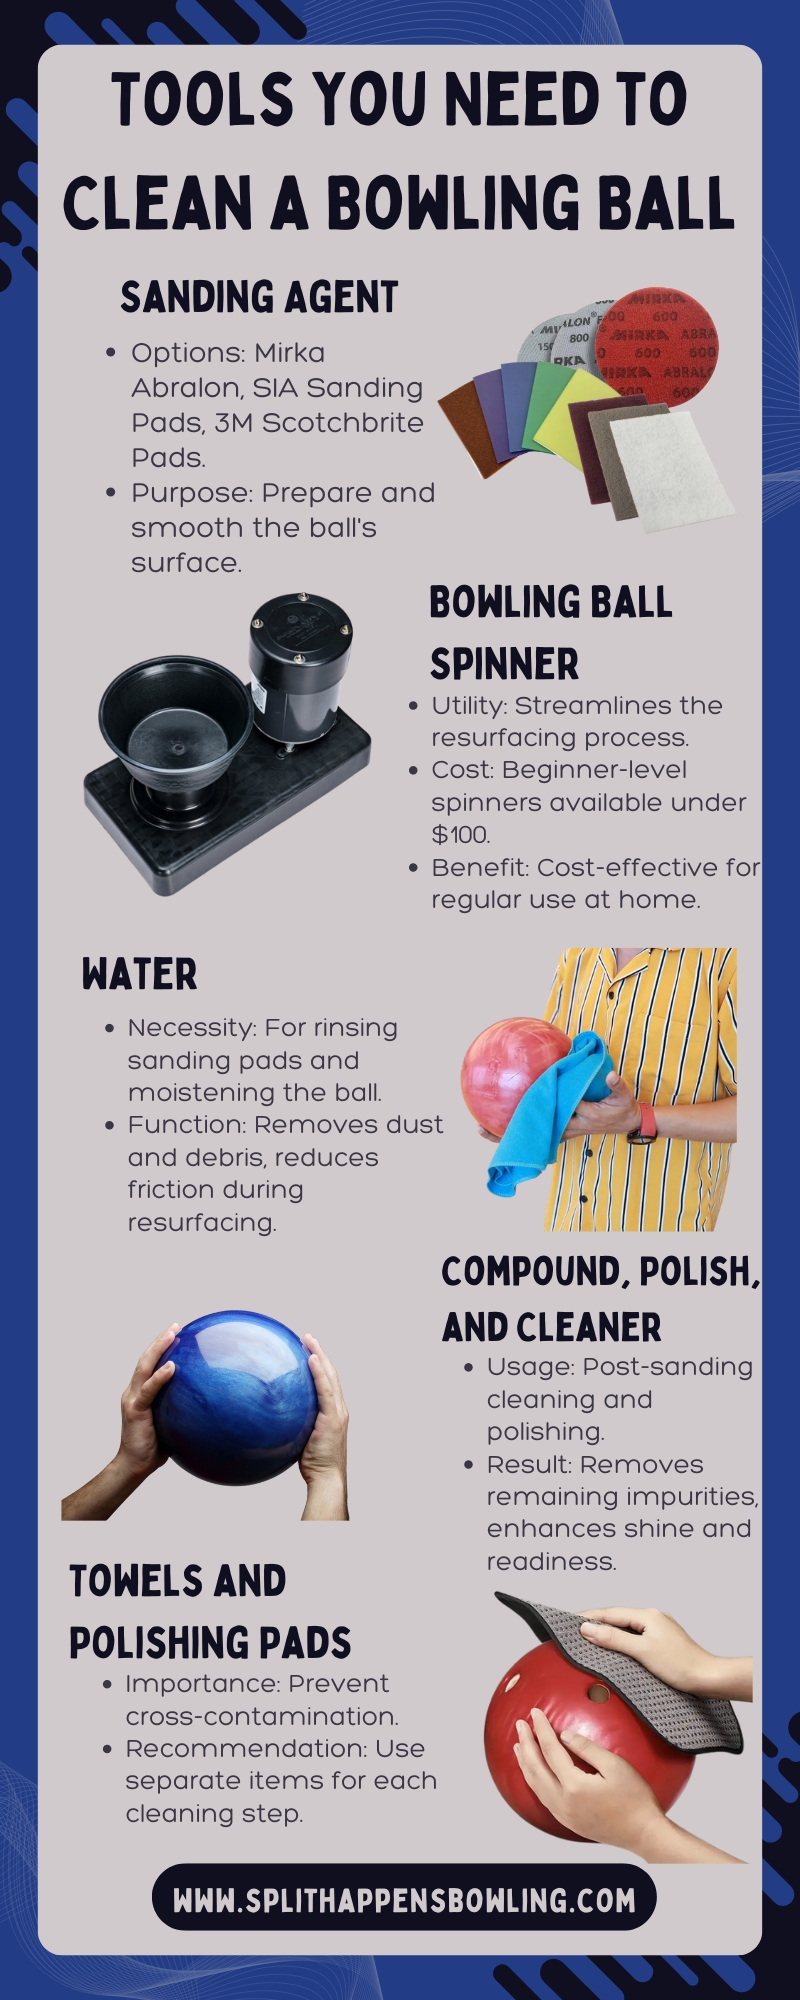 Infographic about tools you need for cleaning a bowling ball